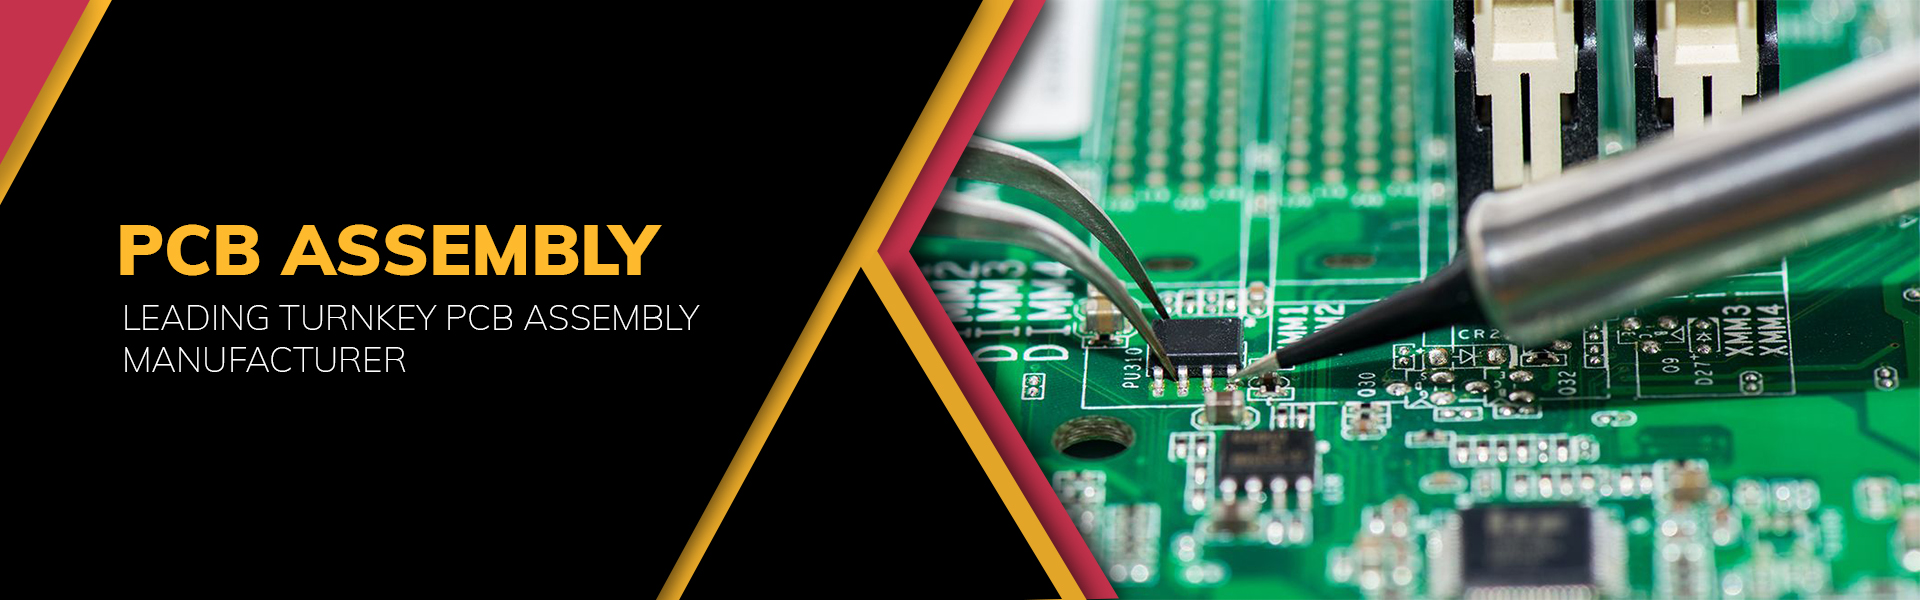 PCB Assembly Services - East India Technologies